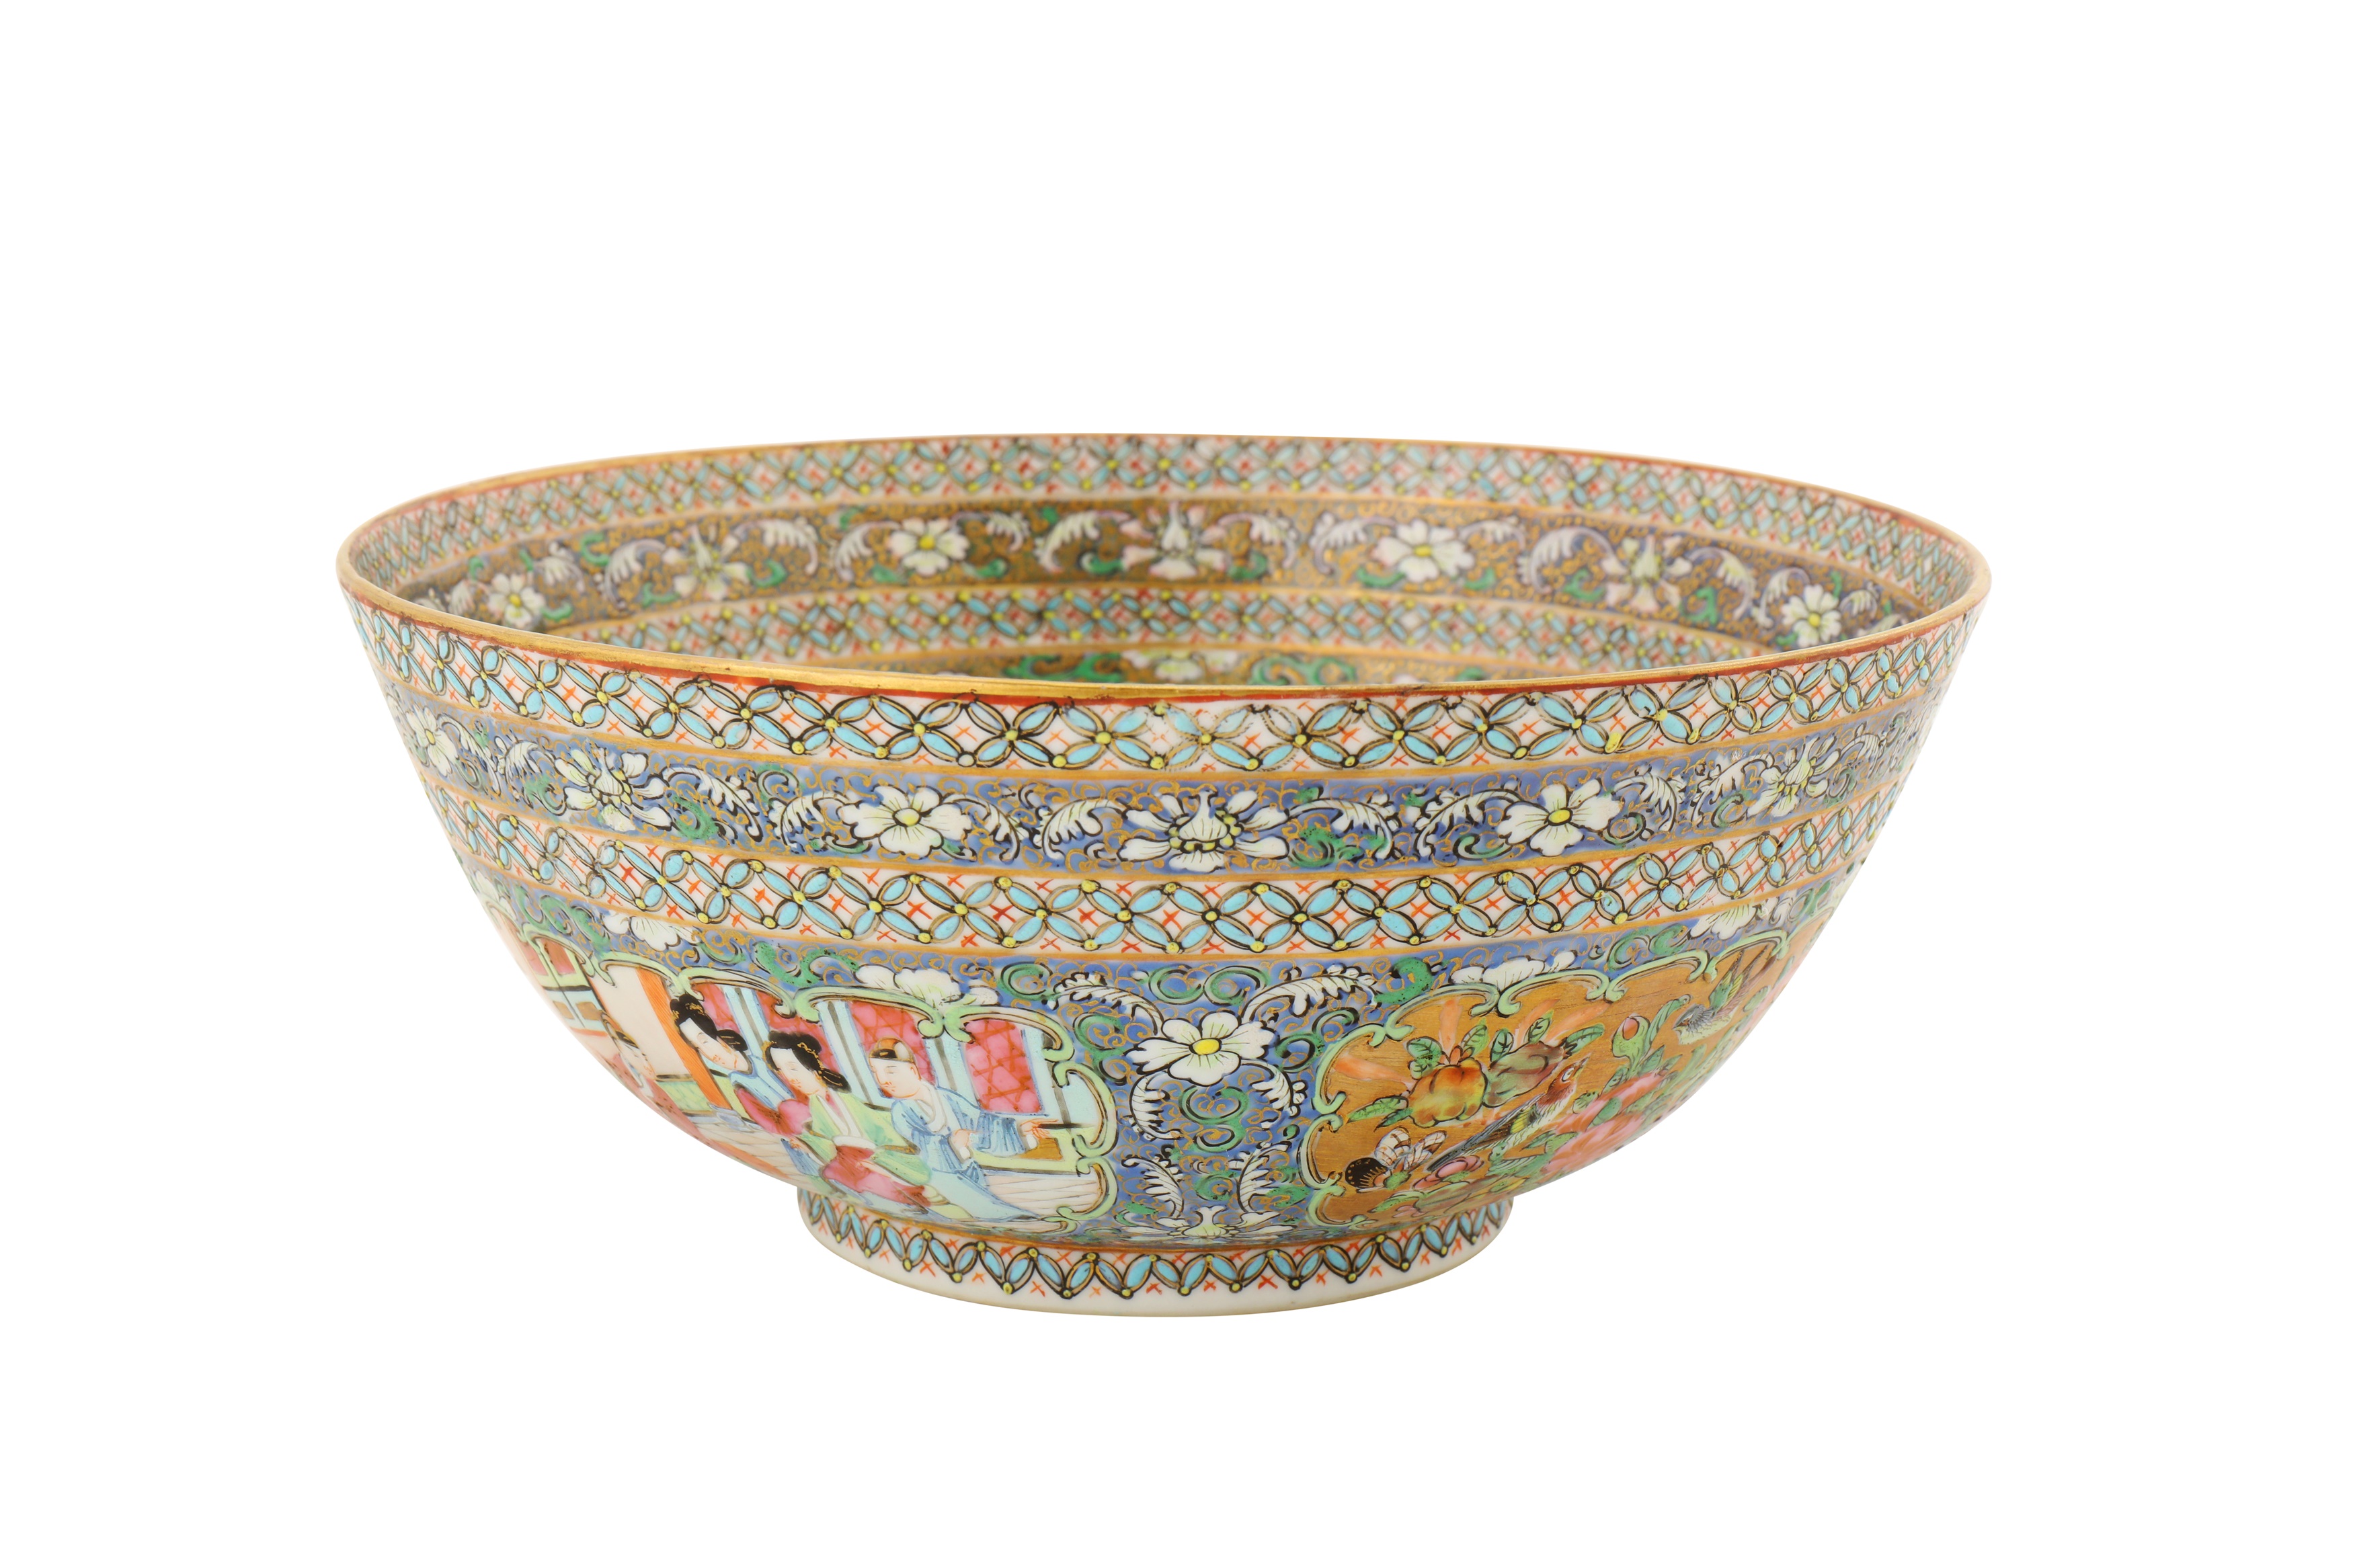 A MEDIUM SIZED BOWL AND DISH FROM THE ZILL AL-SULTAN CANTON PORCELAIN SERVICE - Image 5 of 8